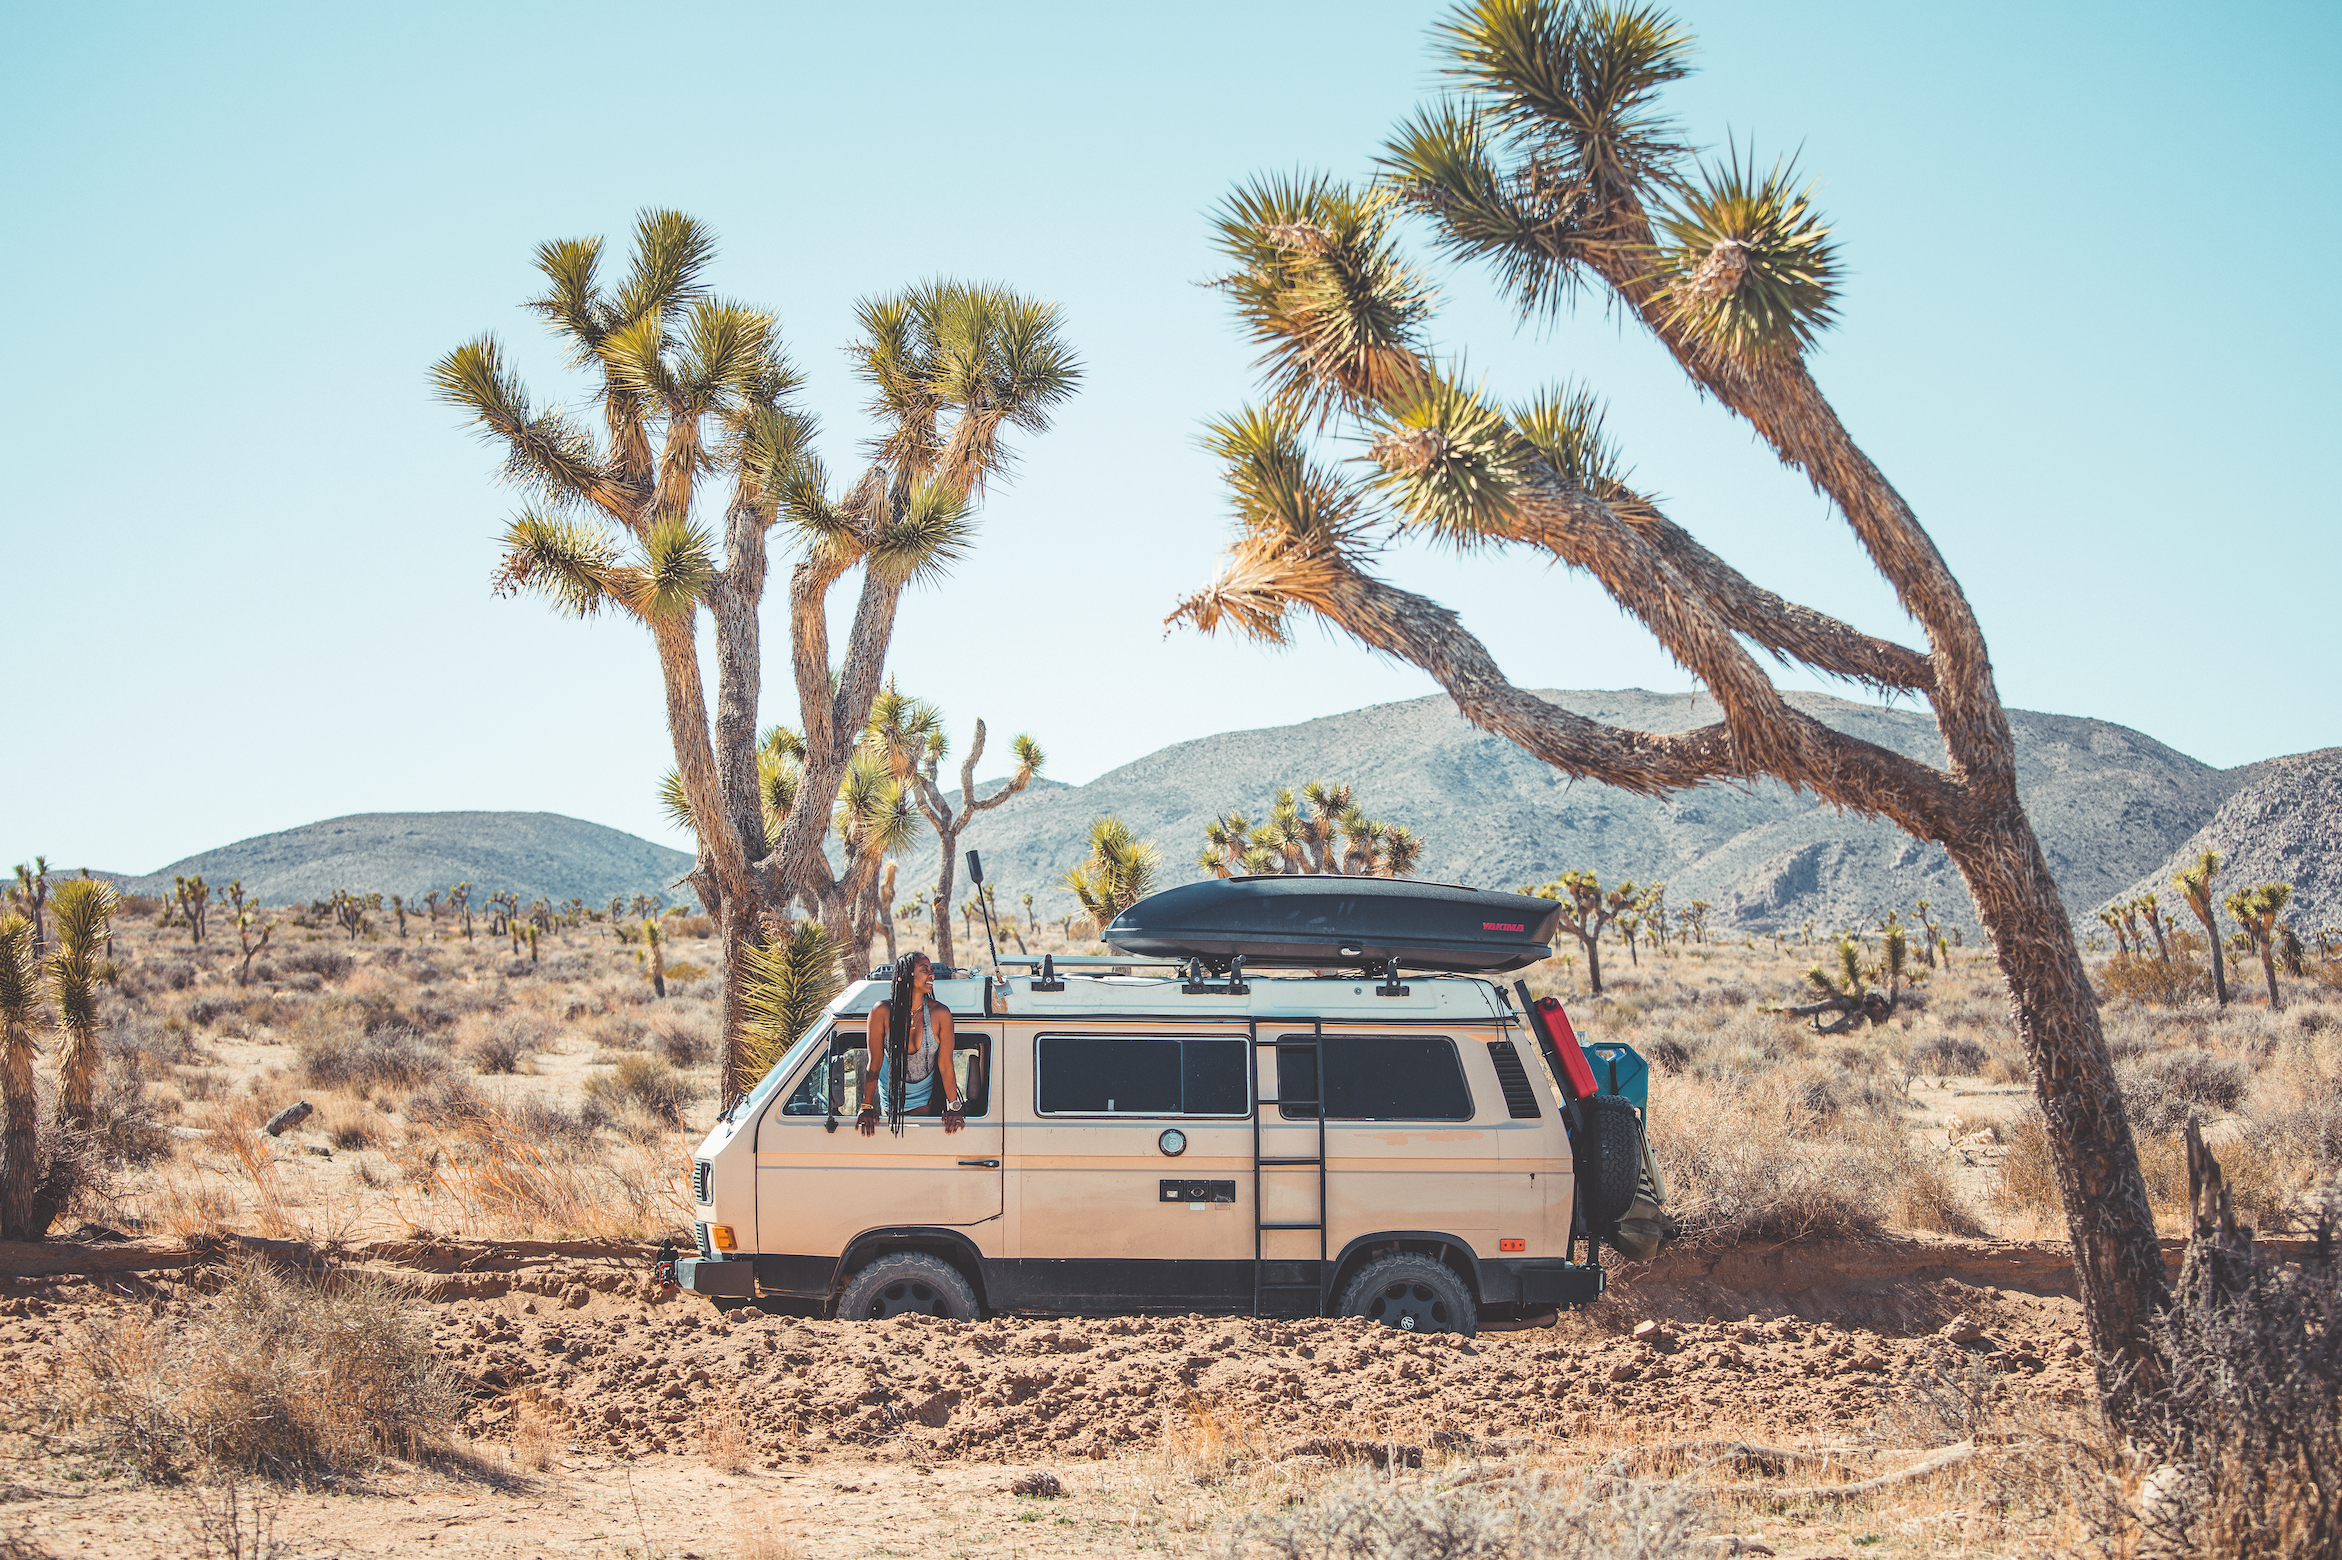 The Truth About ‘Vanlife’ From A Black Woman Nomad 